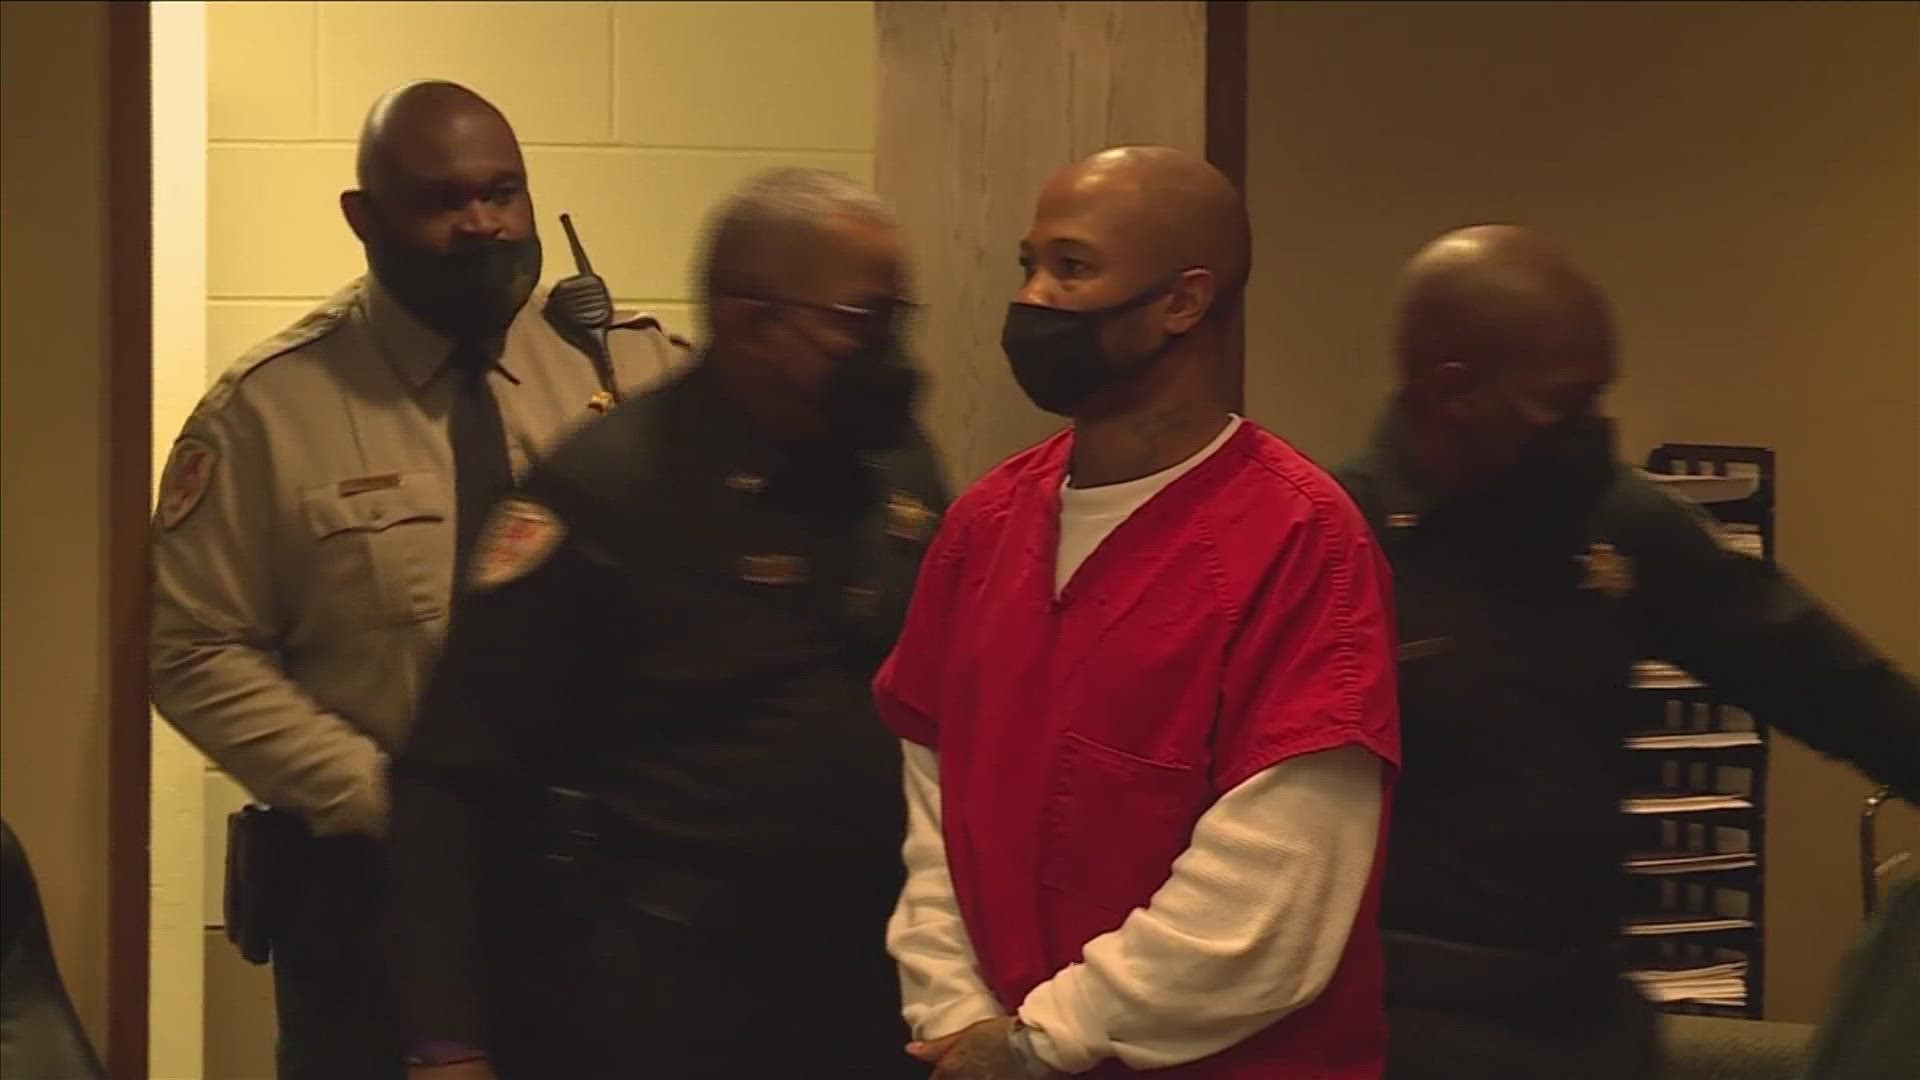 Hernandez Govan pleaded not guilty to murder and conspiracy charges during his arraignment in court Thursday morning.